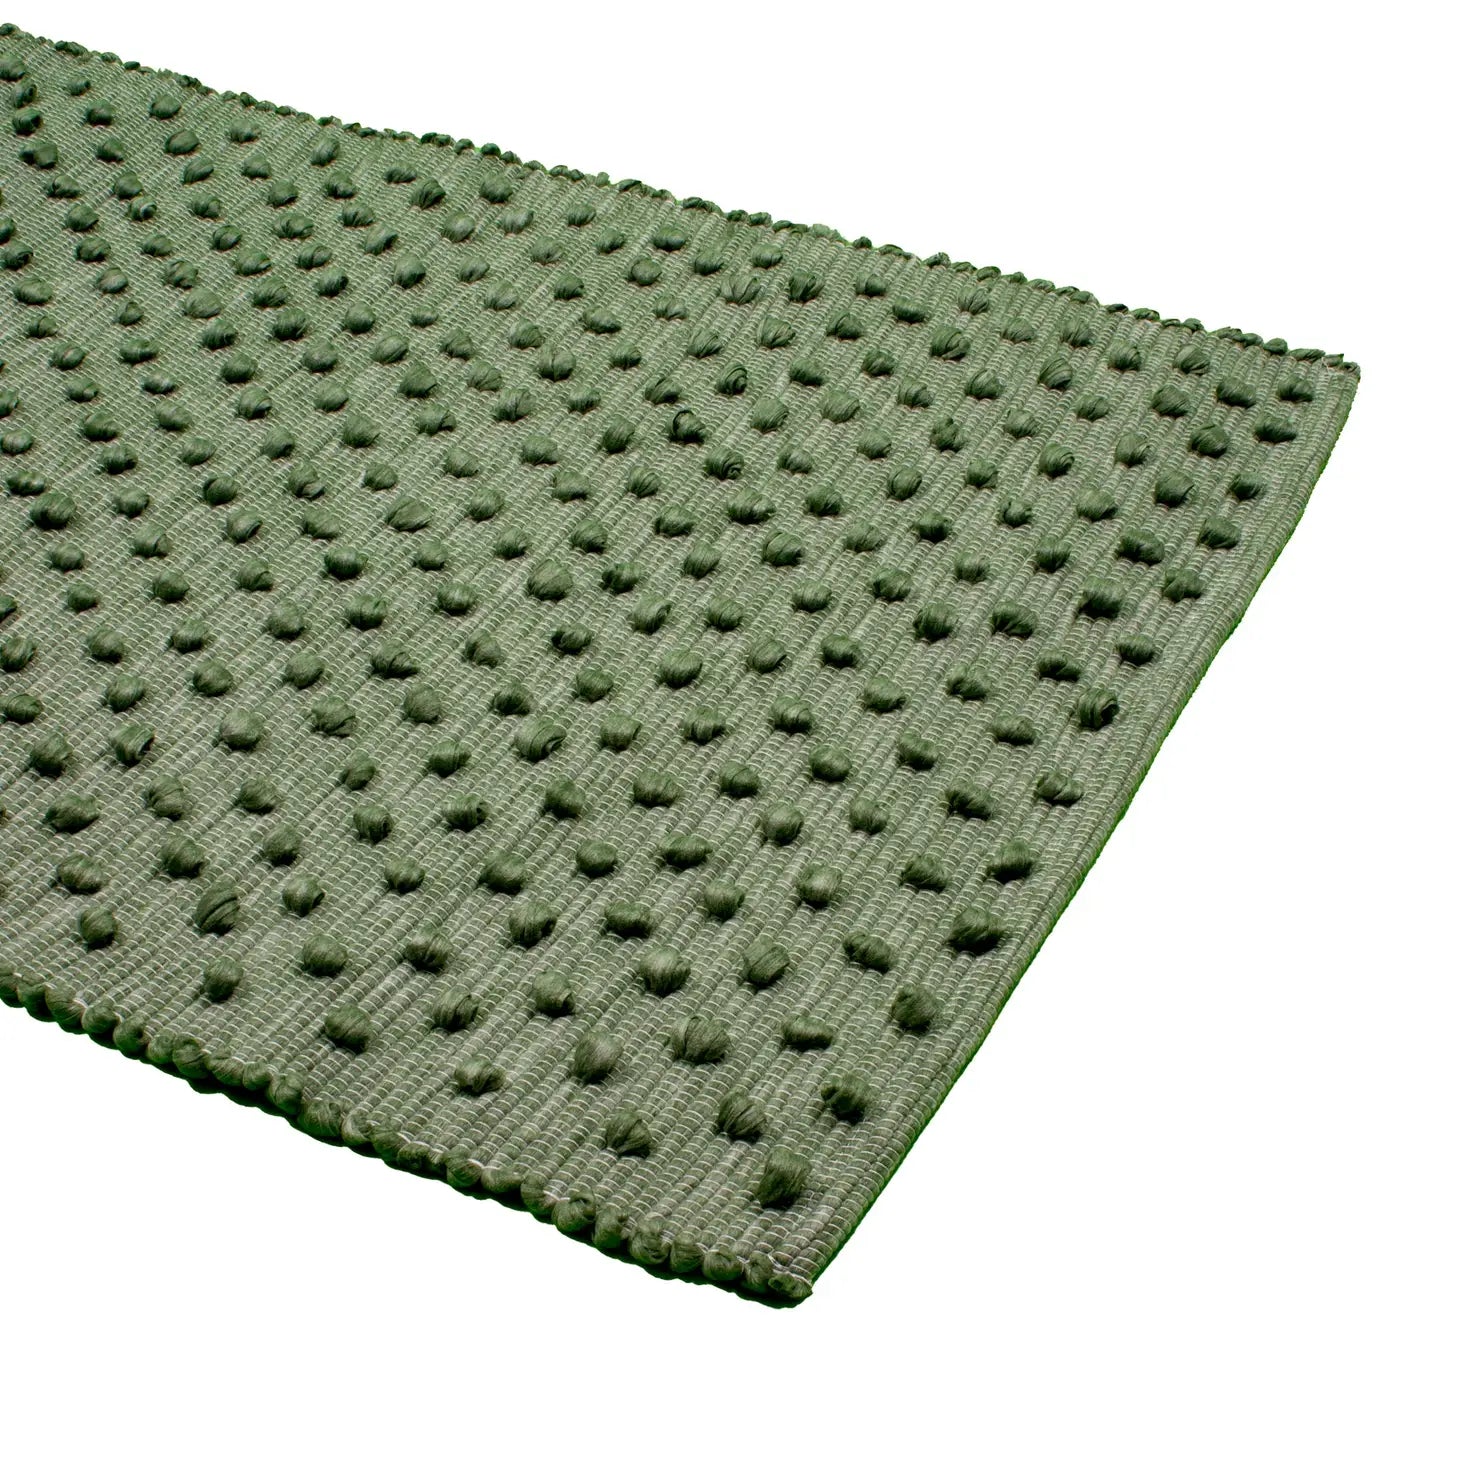 Montaria Handwoven Rug From Upcycled Materials in Green